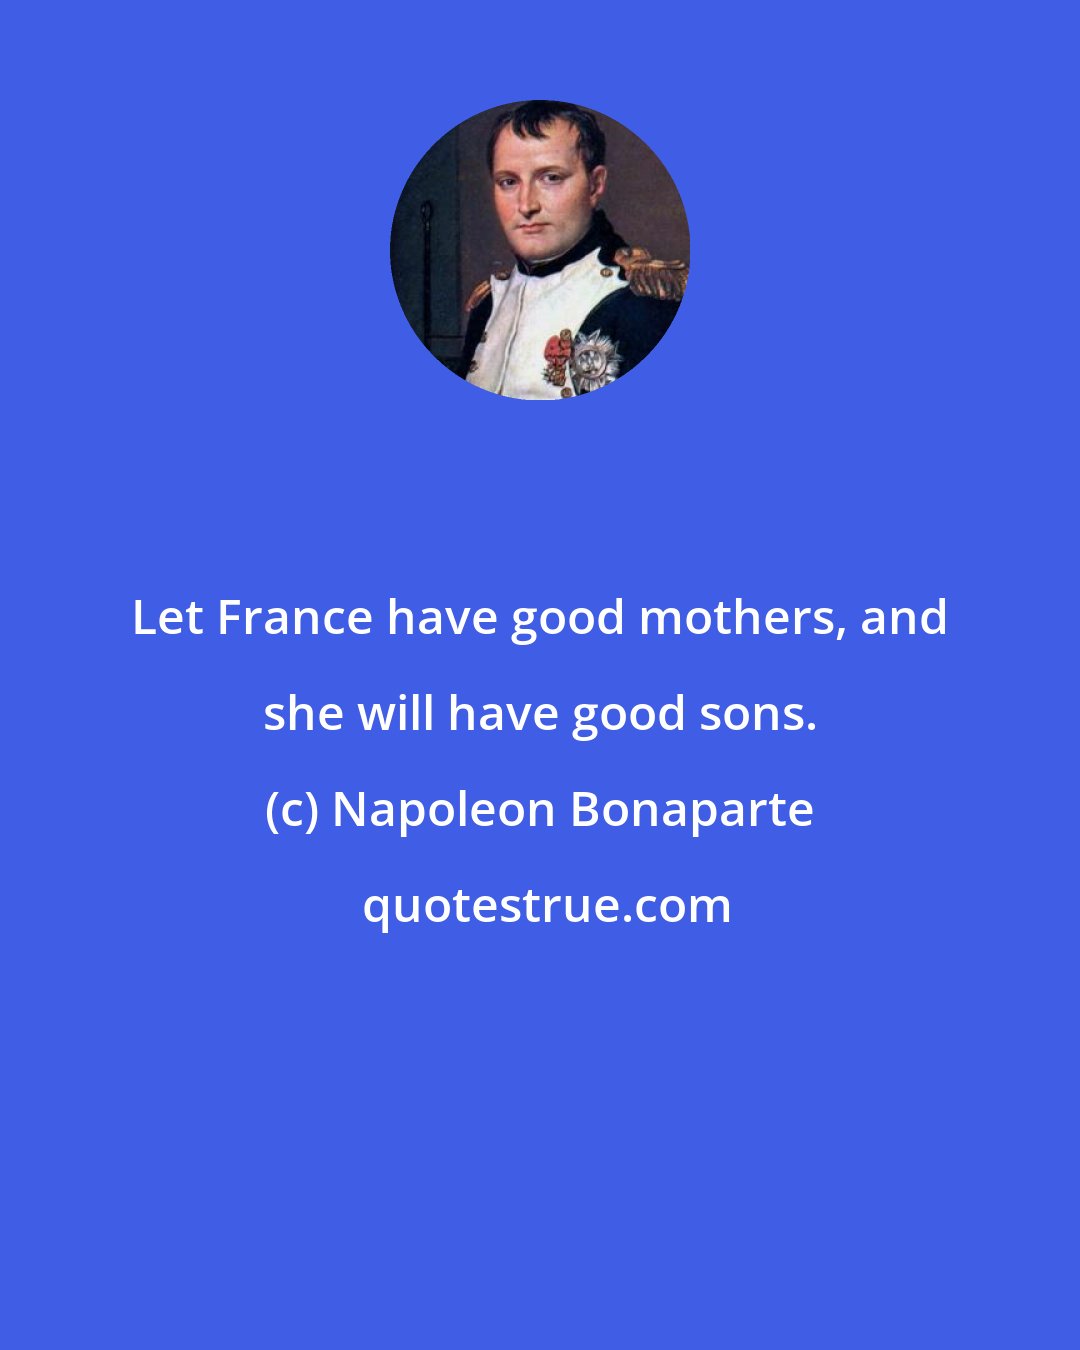 Napoleon Bonaparte: Let France have good mothers, and she will have good sons.